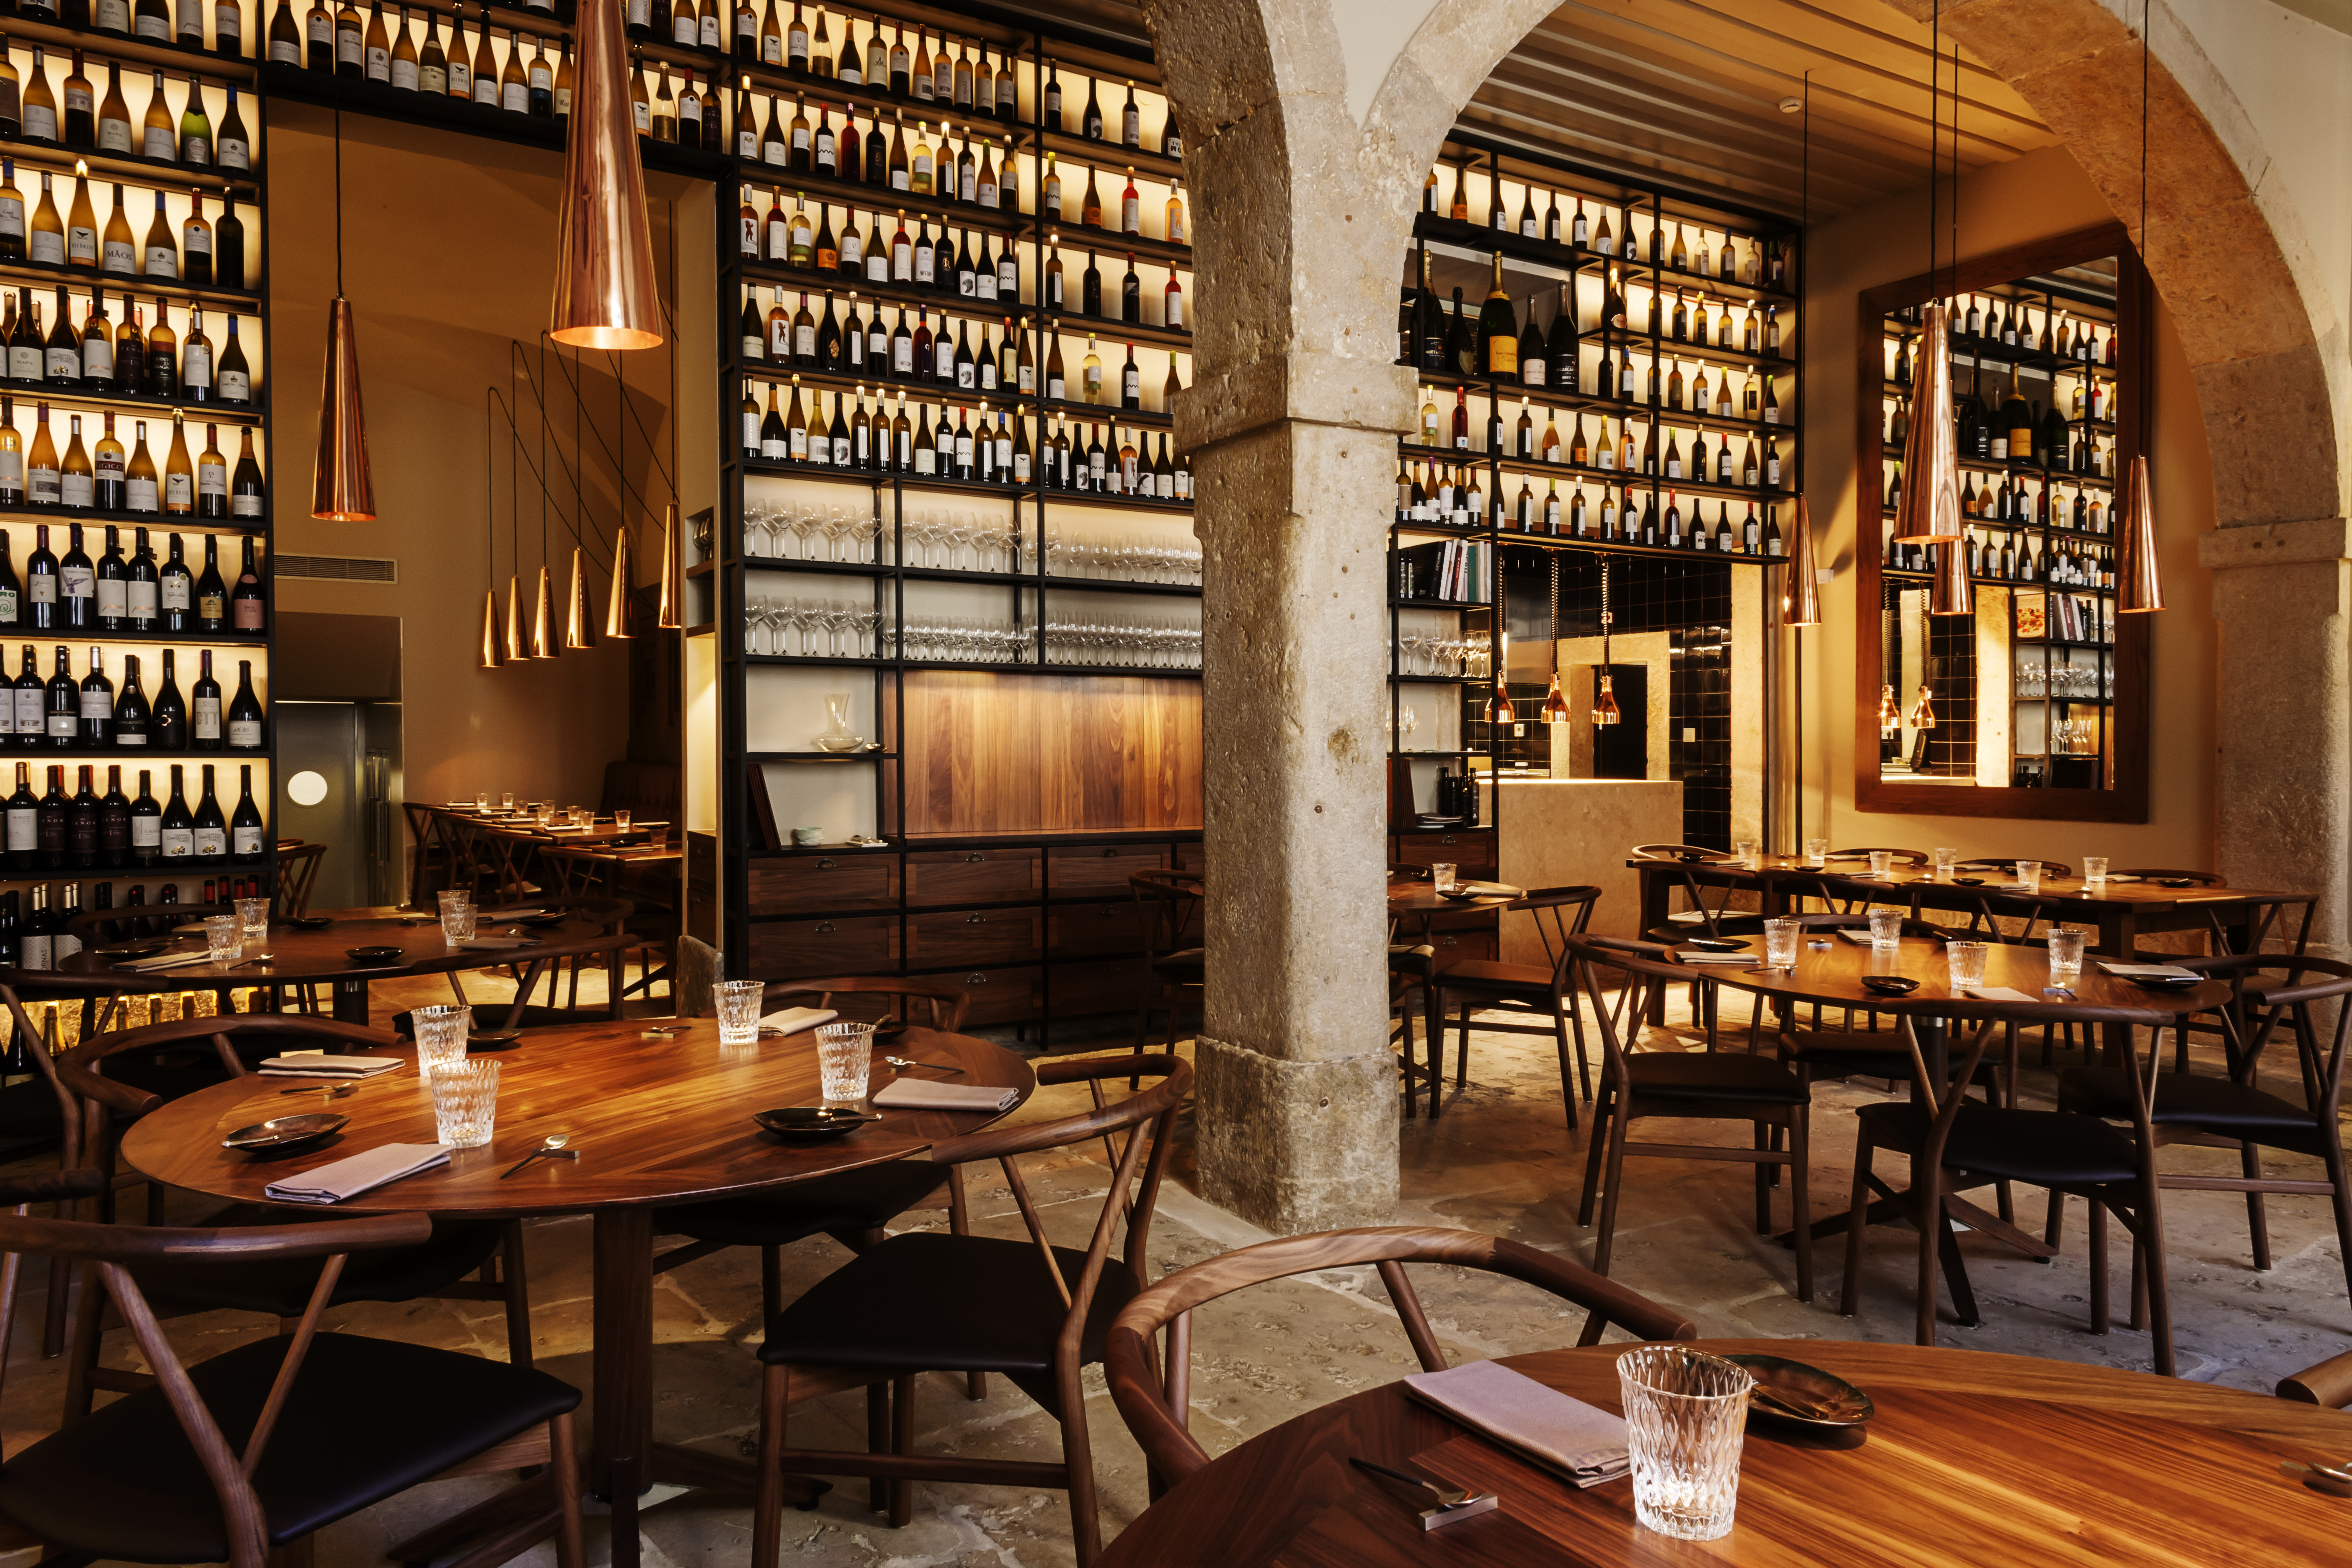 A tall restaurant interior with shelves of bottles, old stone columns, and wooden tables set for dinner. 